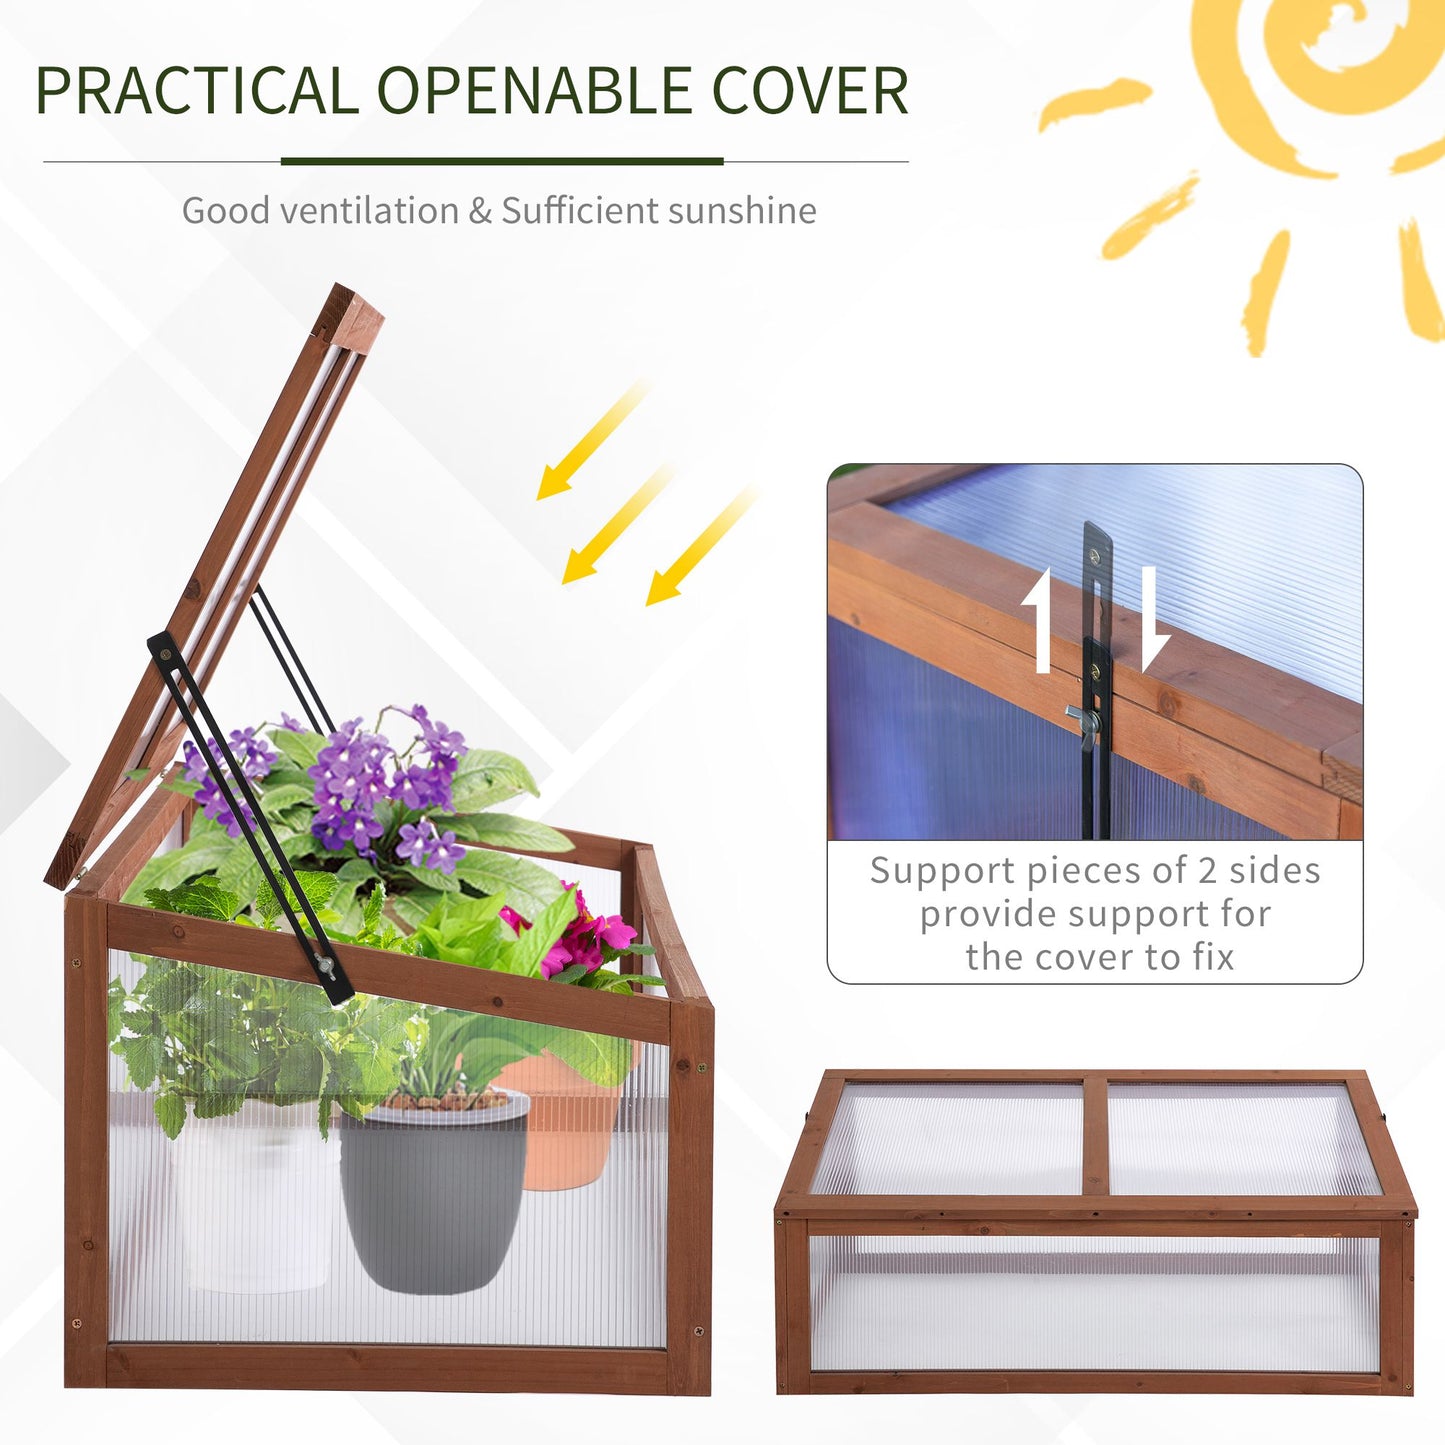 Outsunny Square Wooden Outdoor Greenhouse for Plants with Openable Cover PC Board